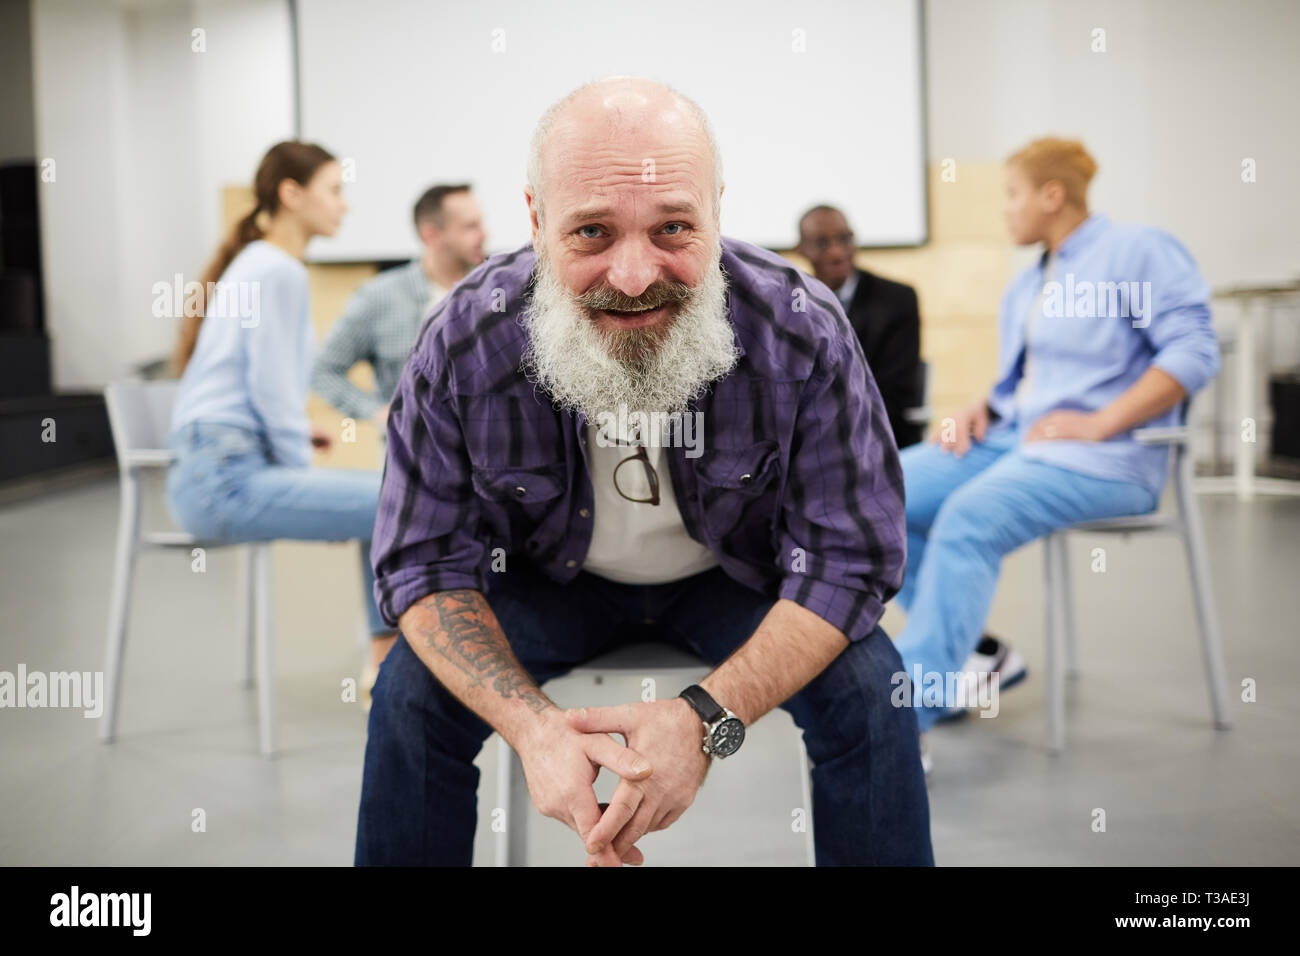 Smiling Senior Man in therapy Session Stock Photo